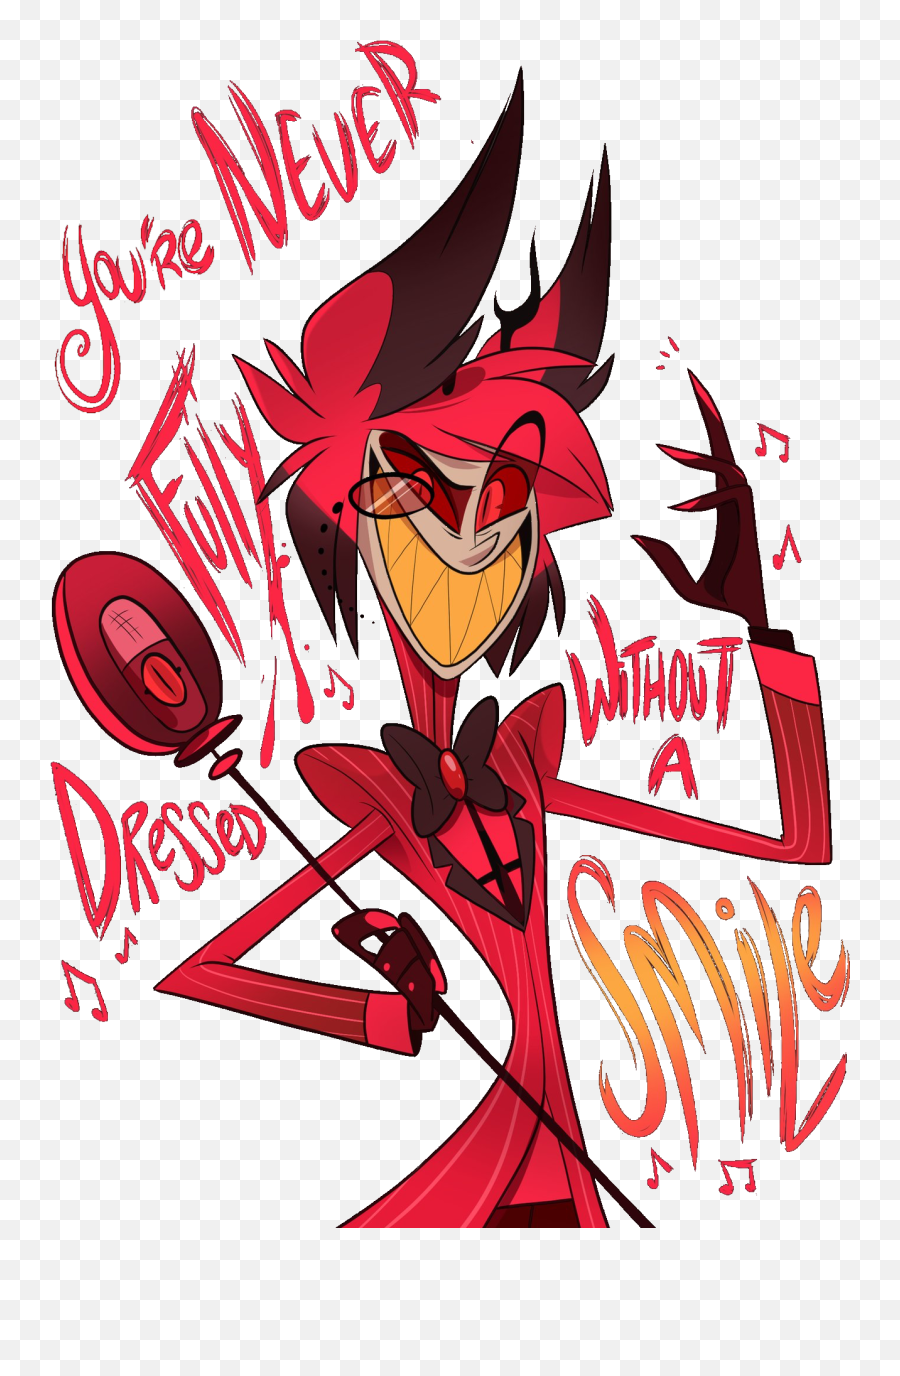 I Made A Png Version Of The T - Shirt Design It Took A Sh Alastor Hazbin Hotel,T Shirts Png